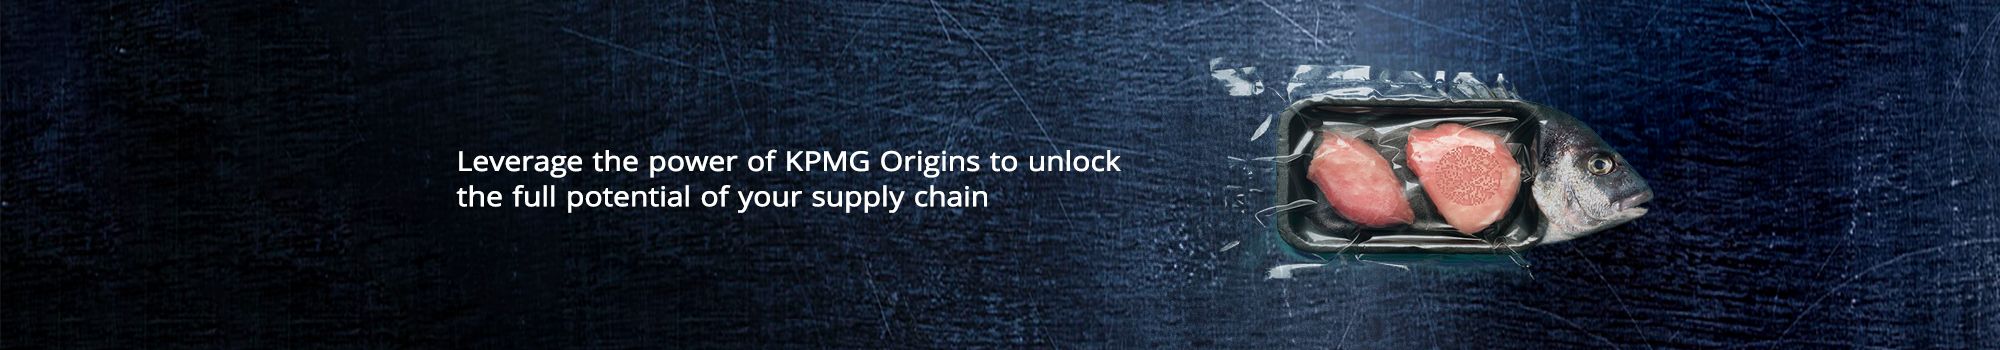 Leverage the power of KPMG Origins to unlock the full potential of your supply chain.